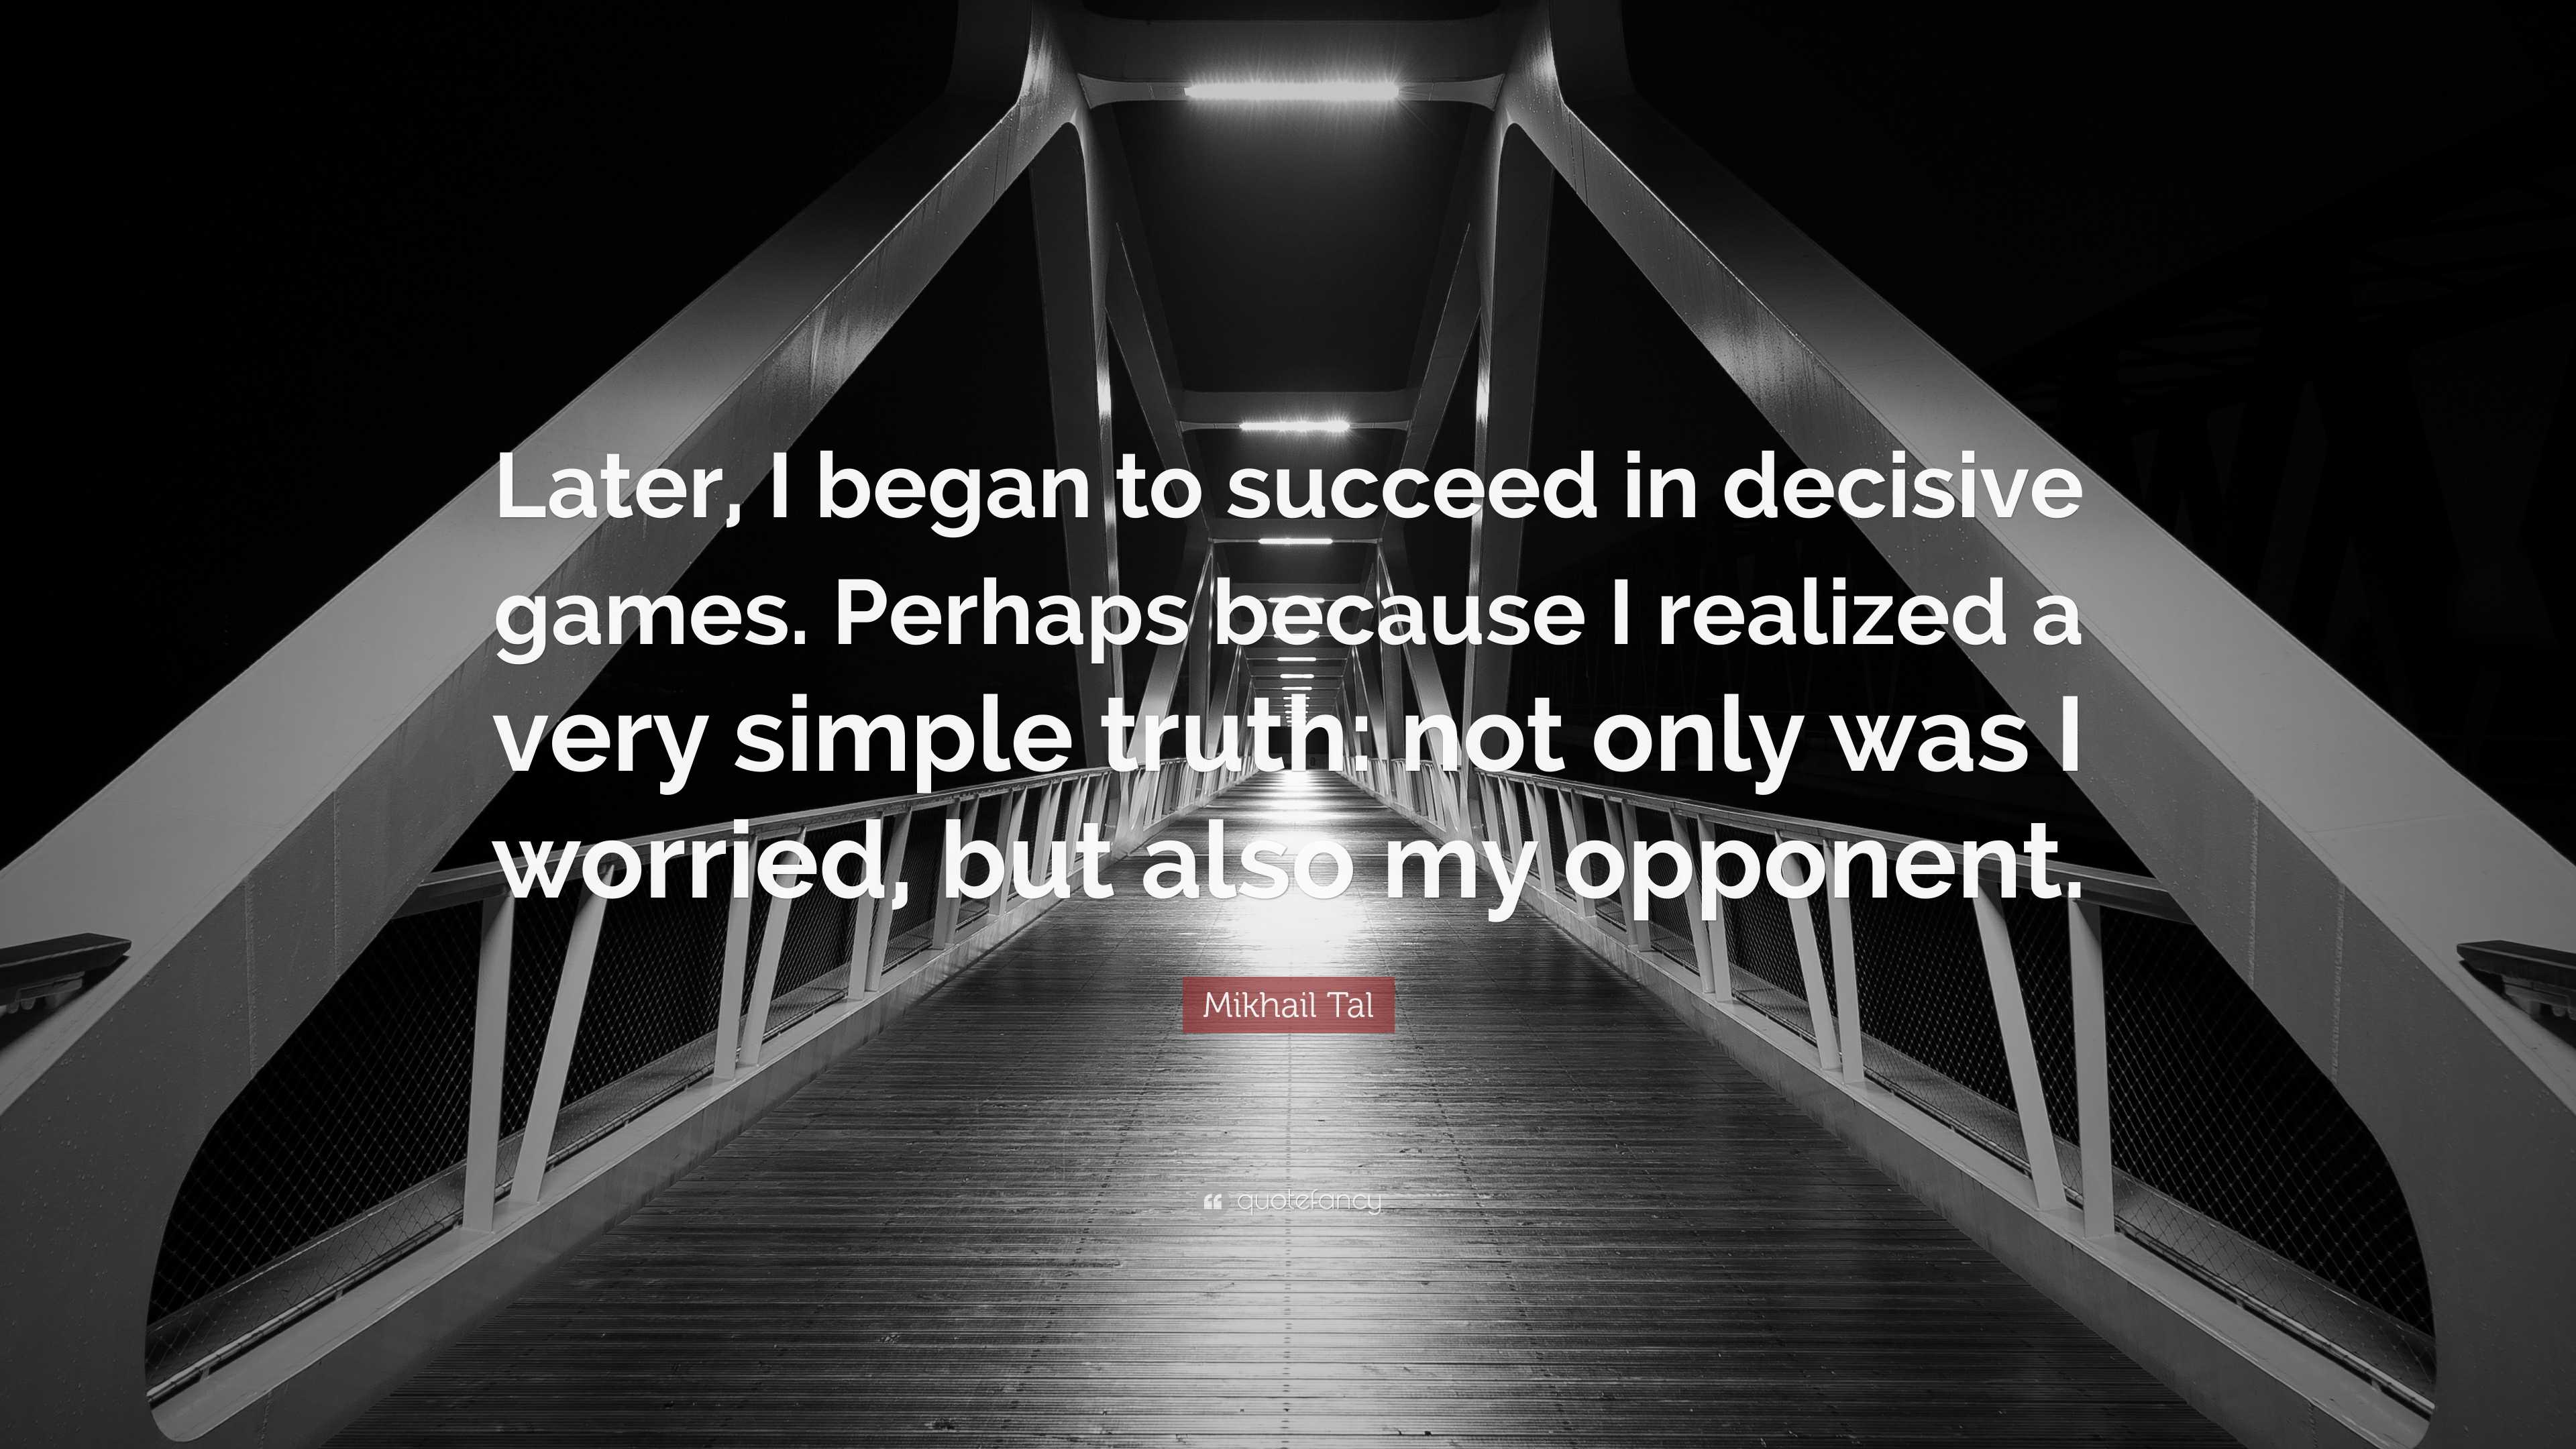 Mikhail Tal Quote: “Later, I began to succeed in decisive games. Perhaps  because I realized a very simple truth: not only was I worried, but”